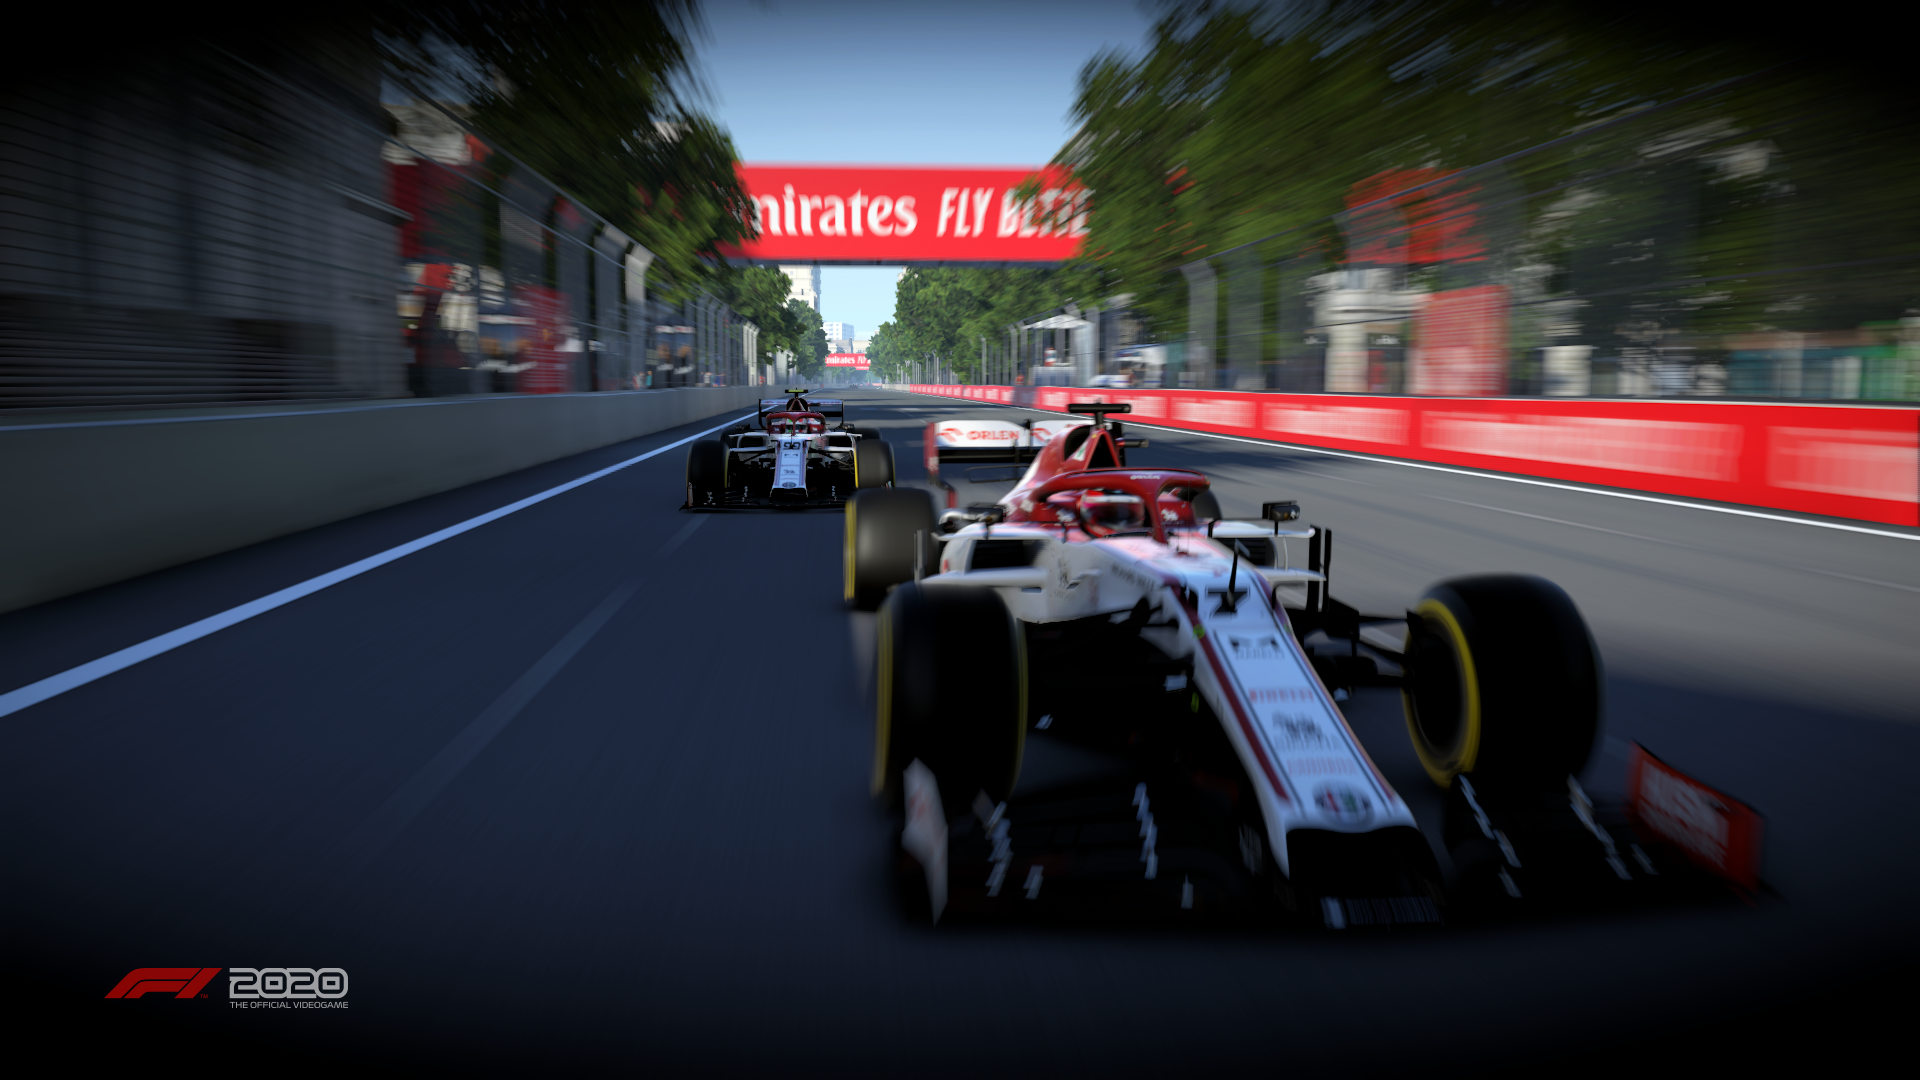 General 1920x1080 Formula 1 f12020 race cars car trees motion blur video games video game art racing video game characters CGI race tracks watermarked driver